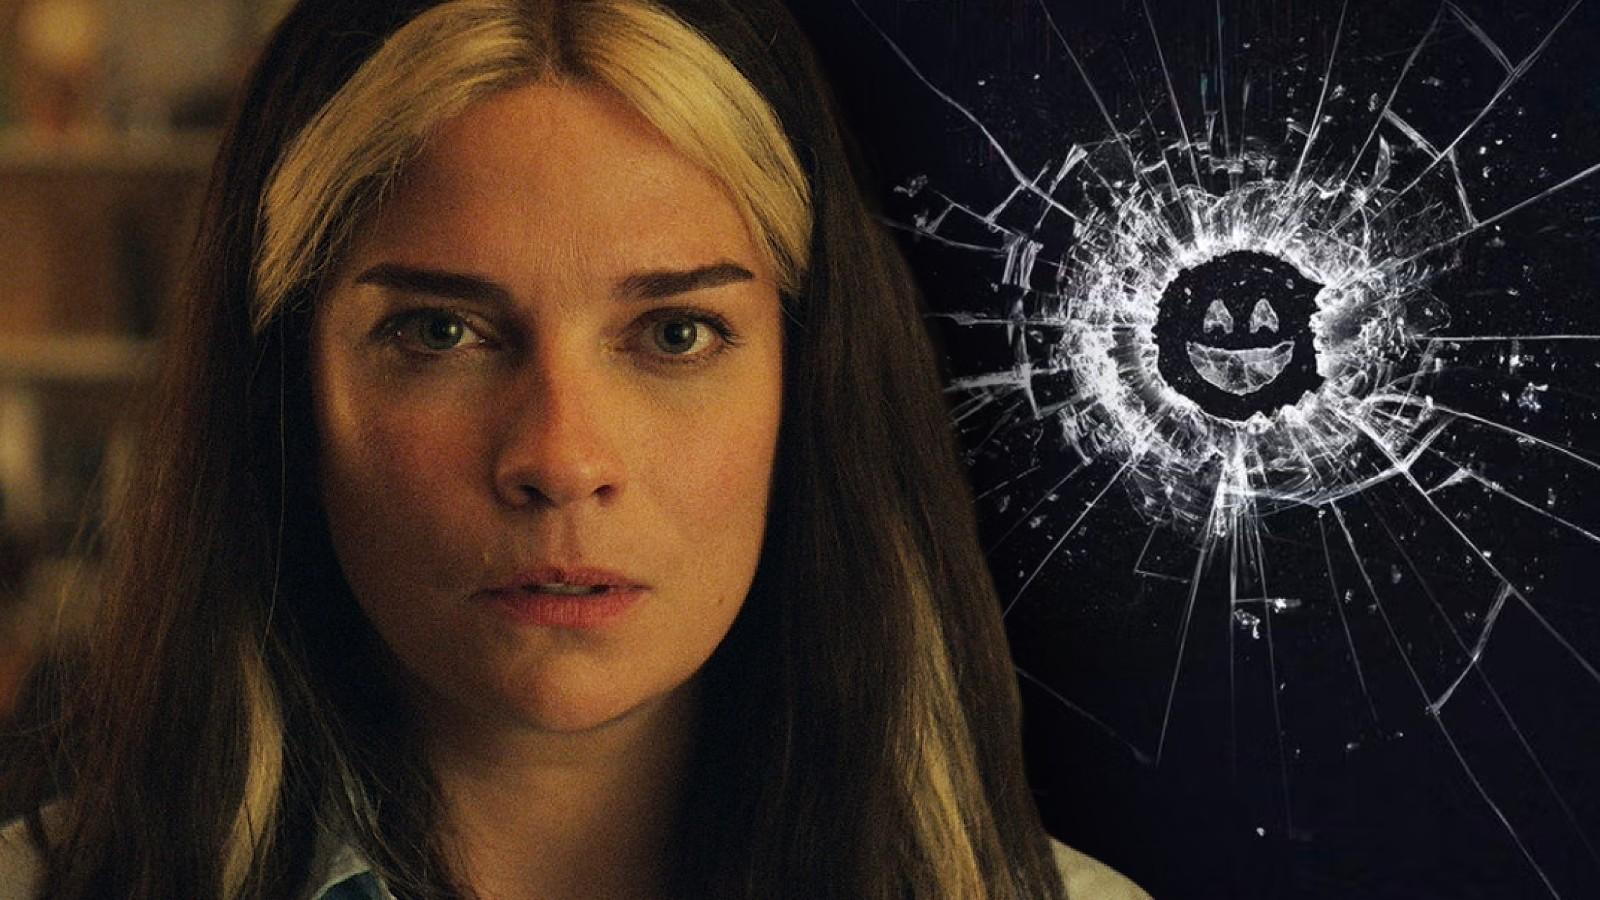 Annie Murphy in Black Mirror and the logo